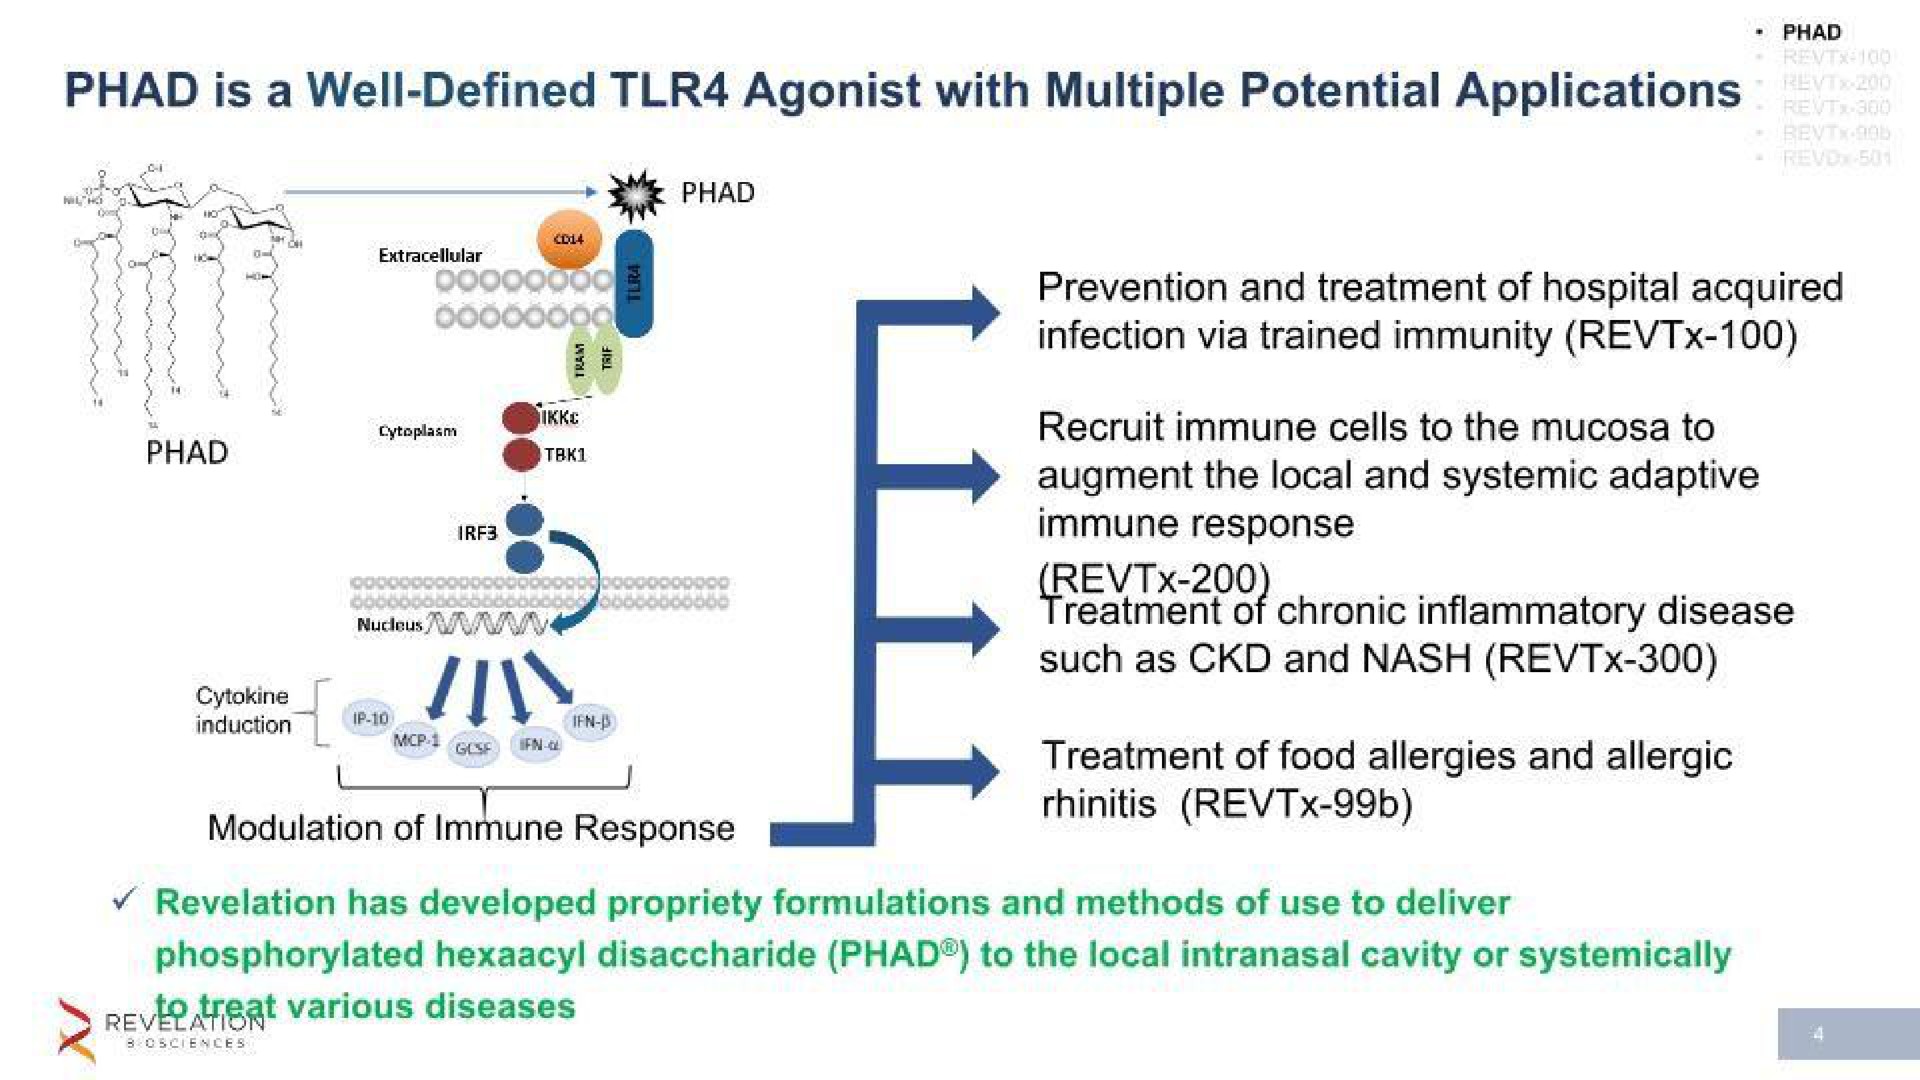 is a well defined agonist with multiple potential applications sam infection via trained immunity augment the local and systemic adaptive immune response such as and nash treatment of food allergies and allergic rhinitis | Revelation Biosciences